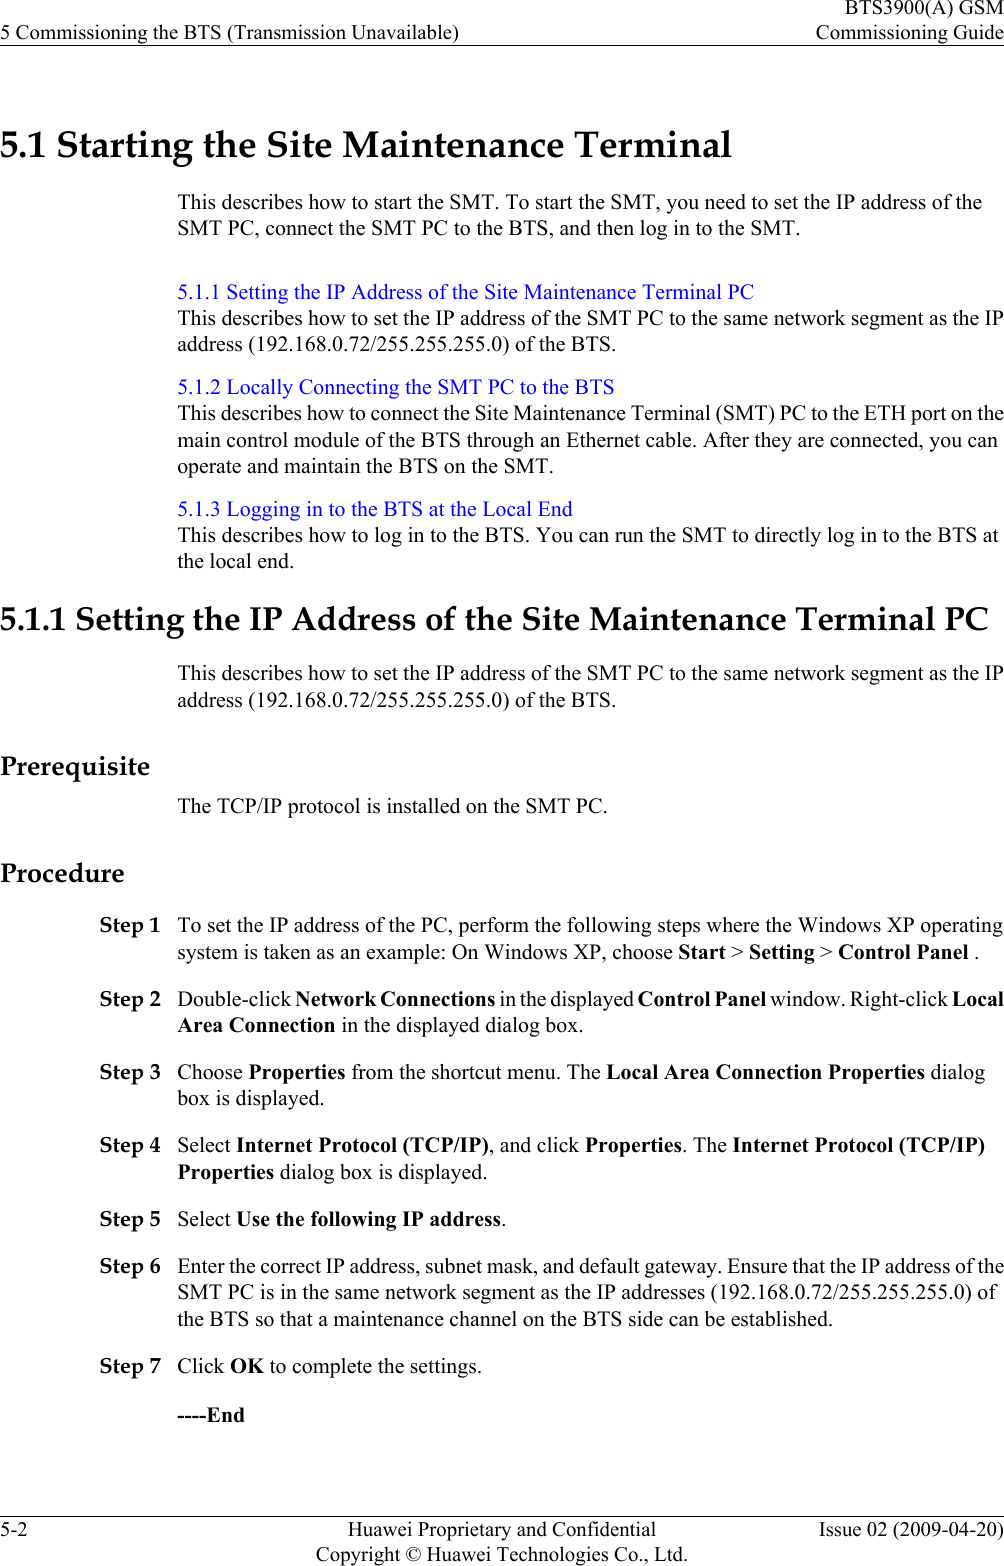 5.1 Starting the Site Maintenance TerminalThis describes how to start the SMT. To start the SMT, you need to set the IP address of theSMT PC, connect the SMT PC to the BTS, and then log in to the SMT.5.1.1 Setting the IP Address of the Site Maintenance Terminal PCThis describes how to set the IP address of the SMT PC to the same network segment as the IPaddress (192.168.0.72/255.255.255.0) of the BTS.5.1.2 Locally Connecting the SMT PC to the BTSThis describes how to connect the Site Maintenance Terminal (SMT) PC to the ETH port on themain control module of the BTS through an Ethernet cable. After they are connected, you canoperate and maintain the BTS on the SMT.5.1.3 Logging in to the BTS at the Local EndThis describes how to log in to the BTS. You can run the SMT to directly log in to the BTS atthe local end.5.1.1 Setting the IP Address of the Site Maintenance Terminal PCThis describes how to set the IP address of the SMT PC to the same network segment as the IPaddress (192.168.0.72/255.255.255.0) of the BTS.PrerequisiteThe TCP/IP protocol is installed on the SMT PC.ProcedureStep 1 To set the IP address of the PC, perform the following steps where the Windows XP operatingsystem is taken as an example: On Windows XP, choose Start &gt; Setting &gt; Control Panel .Step 2 Double-click Network Connections in the displayed Control Panel window. Right-click LocalArea Connection in the displayed dialog box.Step 3 Choose Properties from the shortcut menu. The Local Area Connection Properties dialogbox is displayed.Step 4 Select Internet Protocol (TCP/IP), and click Properties. The Internet Protocol (TCP/IP)Properties dialog box is displayed.Step 5 Select Use the following IP address.Step 6 Enter the correct IP address, subnet mask, and default gateway. Ensure that the IP address of theSMT PC is in the same network segment as the IP addresses (192.168.0.72/255.255.255.0) ofthe BTS so that a maintenance channel on the BTS side can be established.Step 7 Click OK to complete the settings.----End5 Commissioning the BTS (Transmission Unavailable)BTS3900(A) GSMCommissioning Guide5-2 Huawei Proprietary and ConfidentialCopyright © Huawei Technologies Co., Ltd.Issue 02 (2009-04-20)